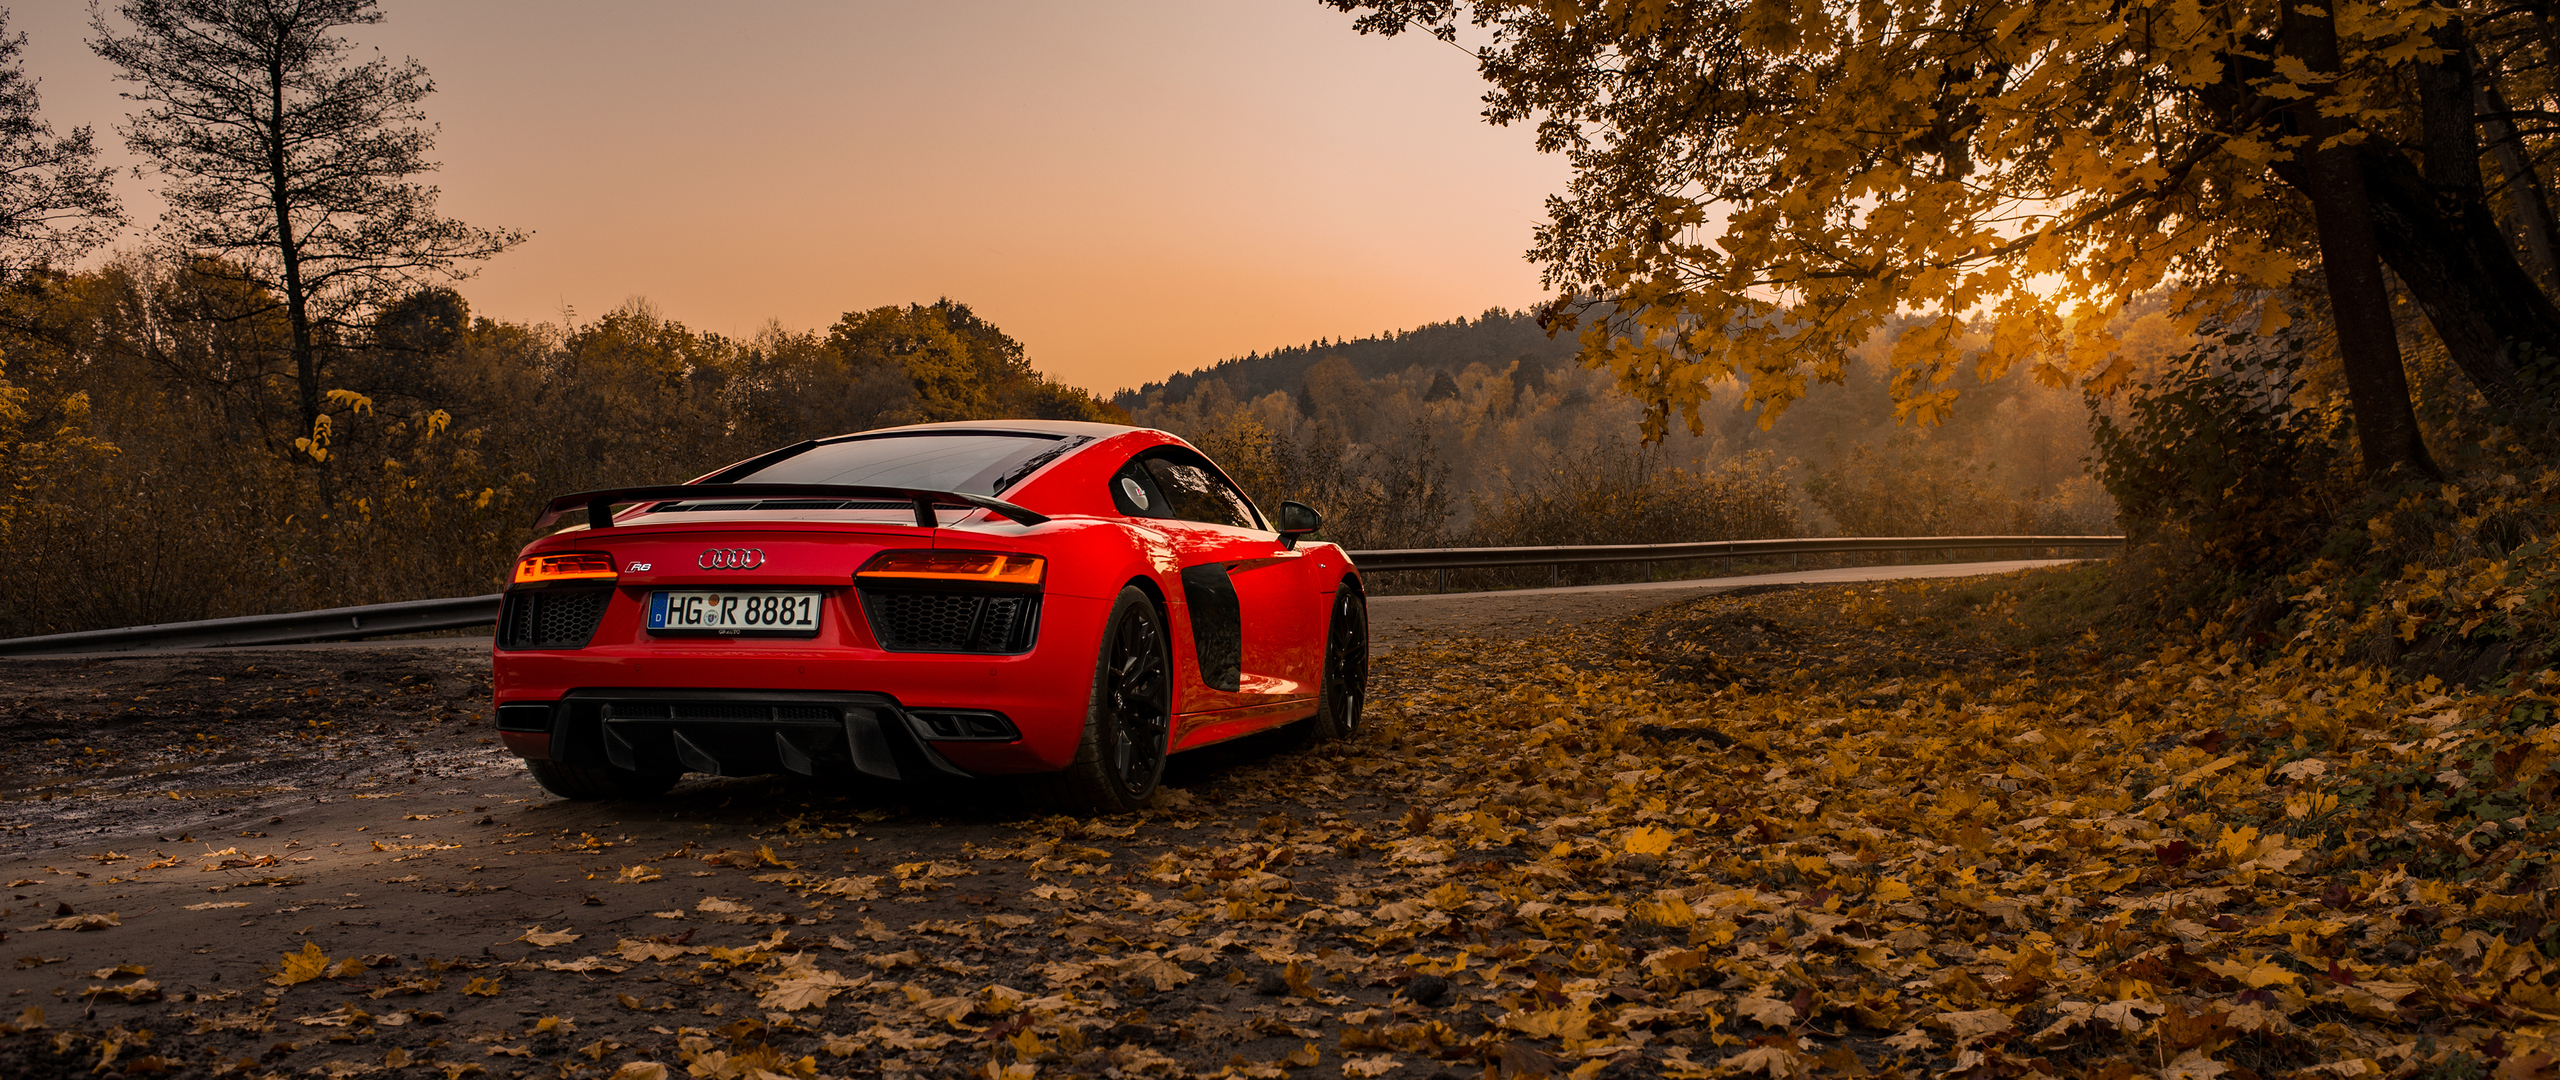 2560x1080 Audi R8 V10 Plus 2560x1080 Resolution Hd 4k Wallpapers Images Backgrounds Photos And Pictures